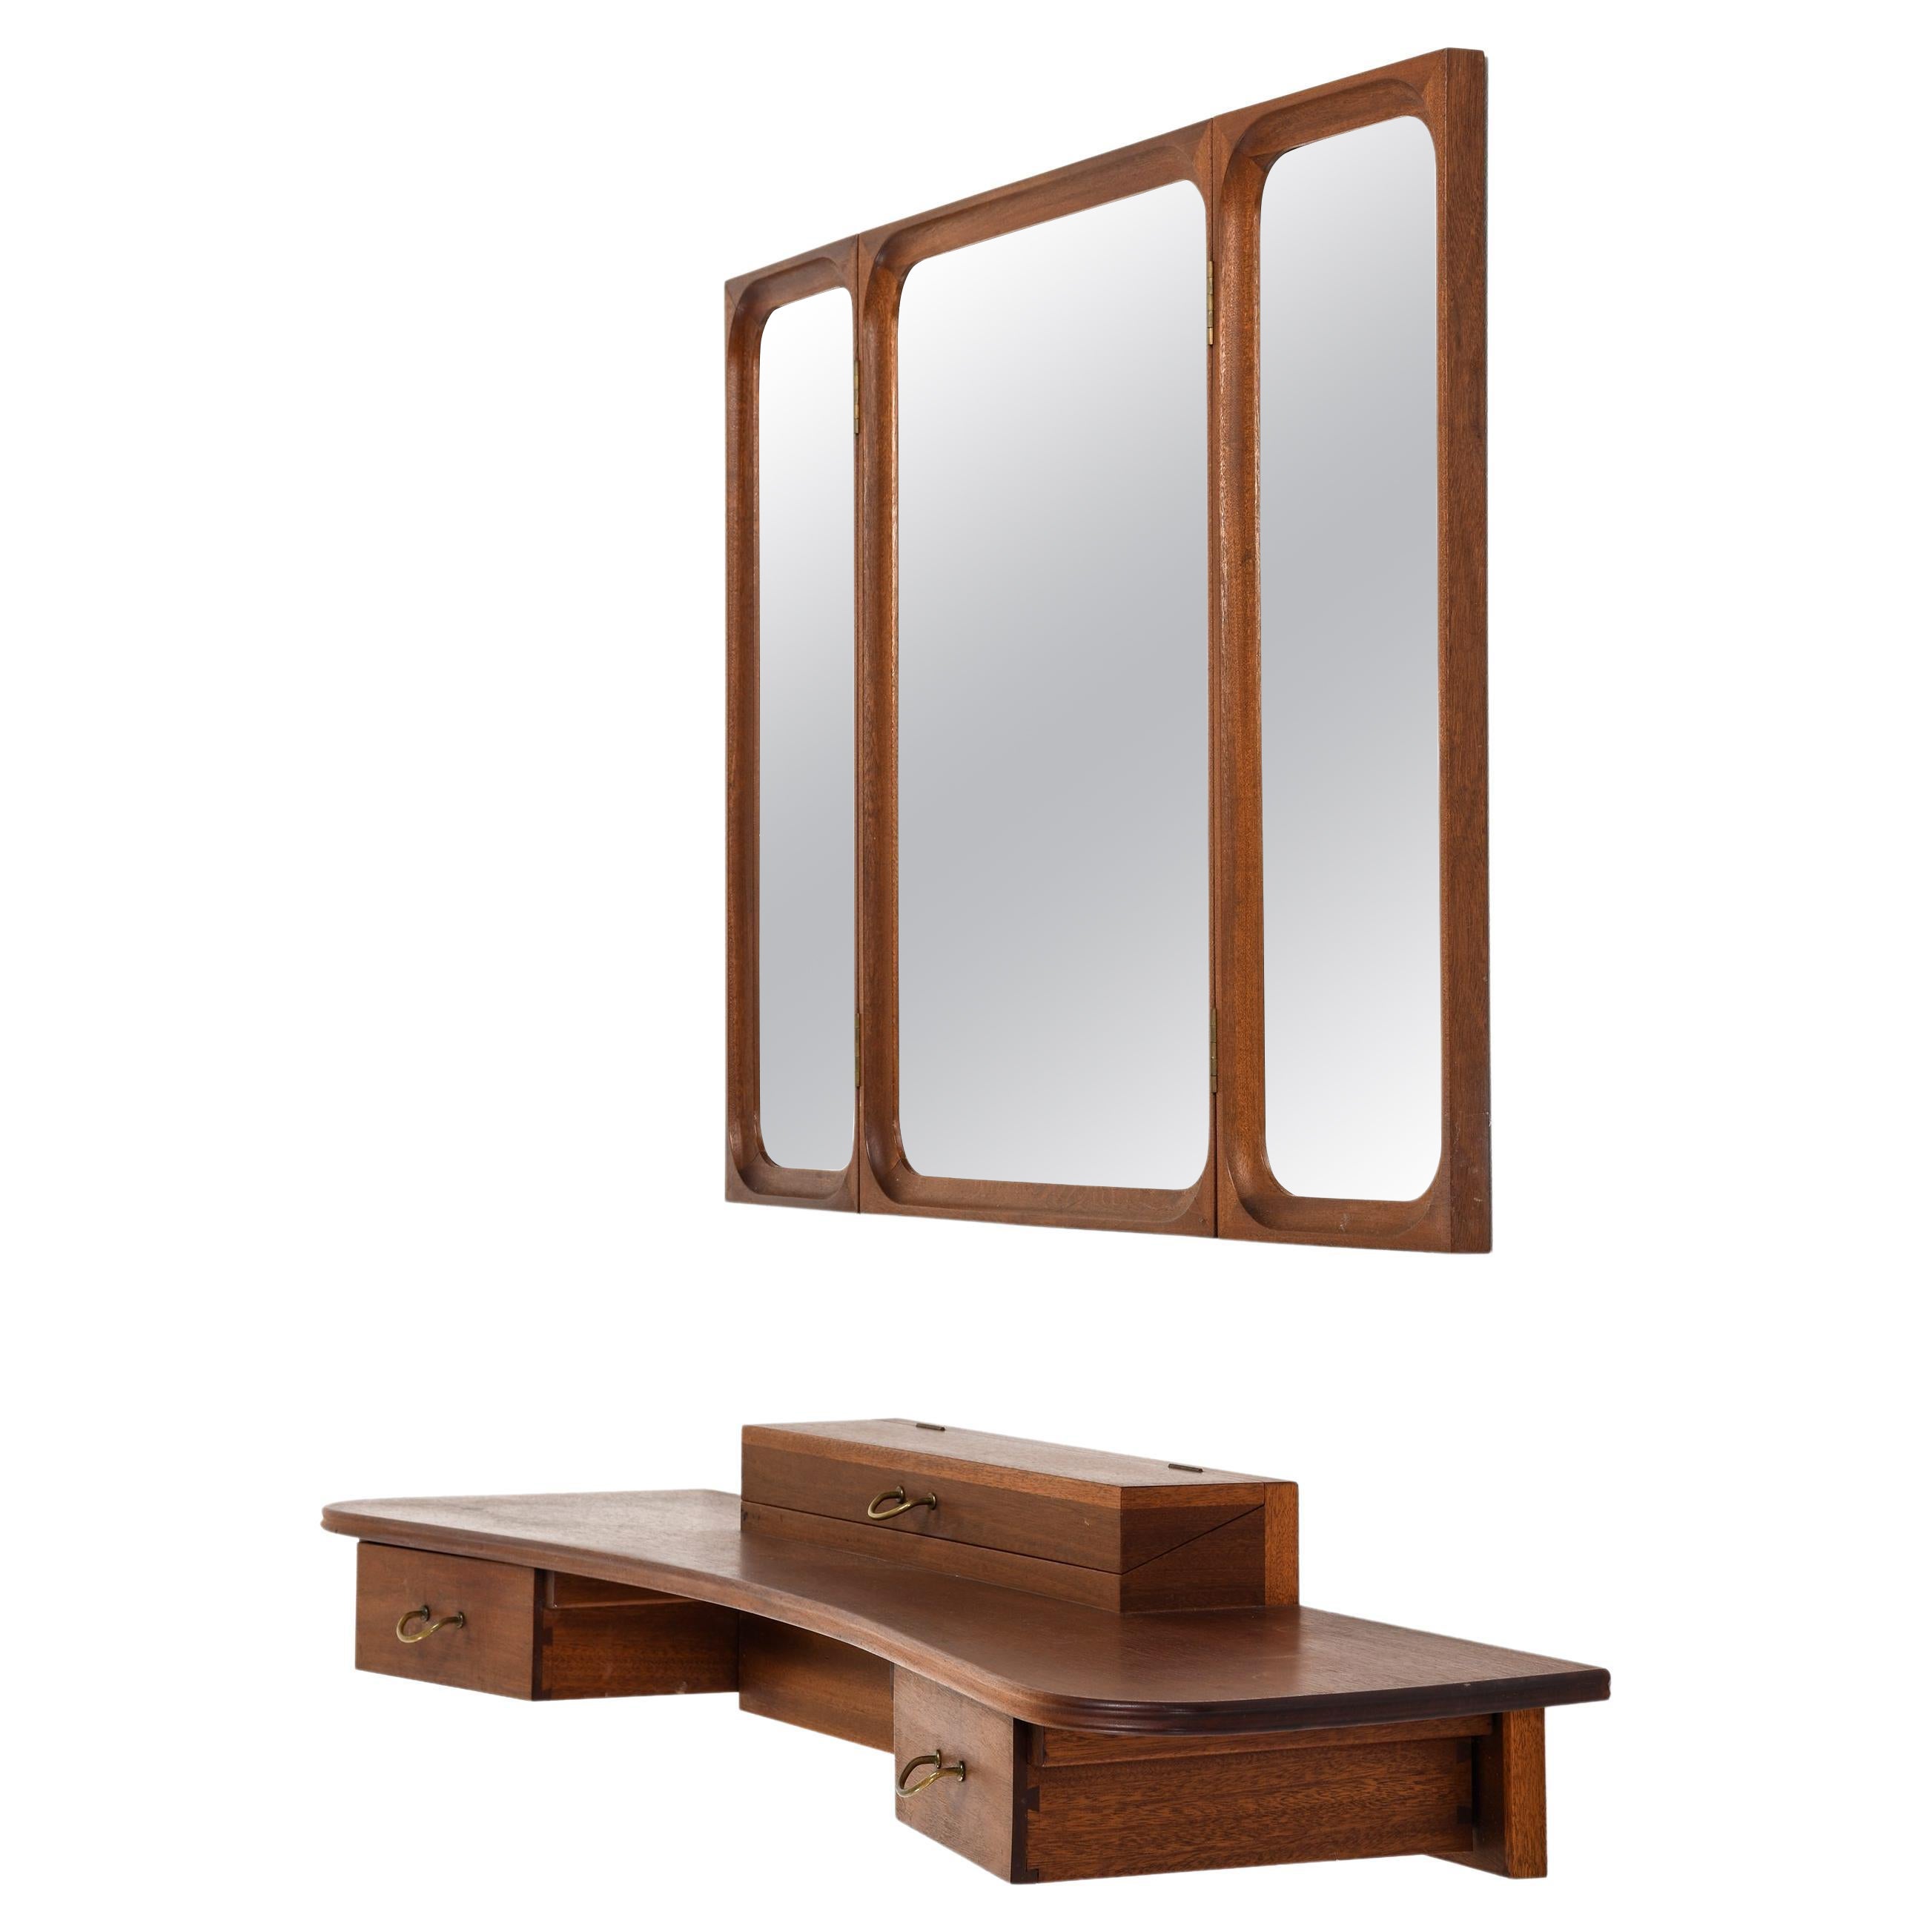 Set of Vanity with Mirror in Mahogany and Brass by Frode Holm, 1950s For Sale